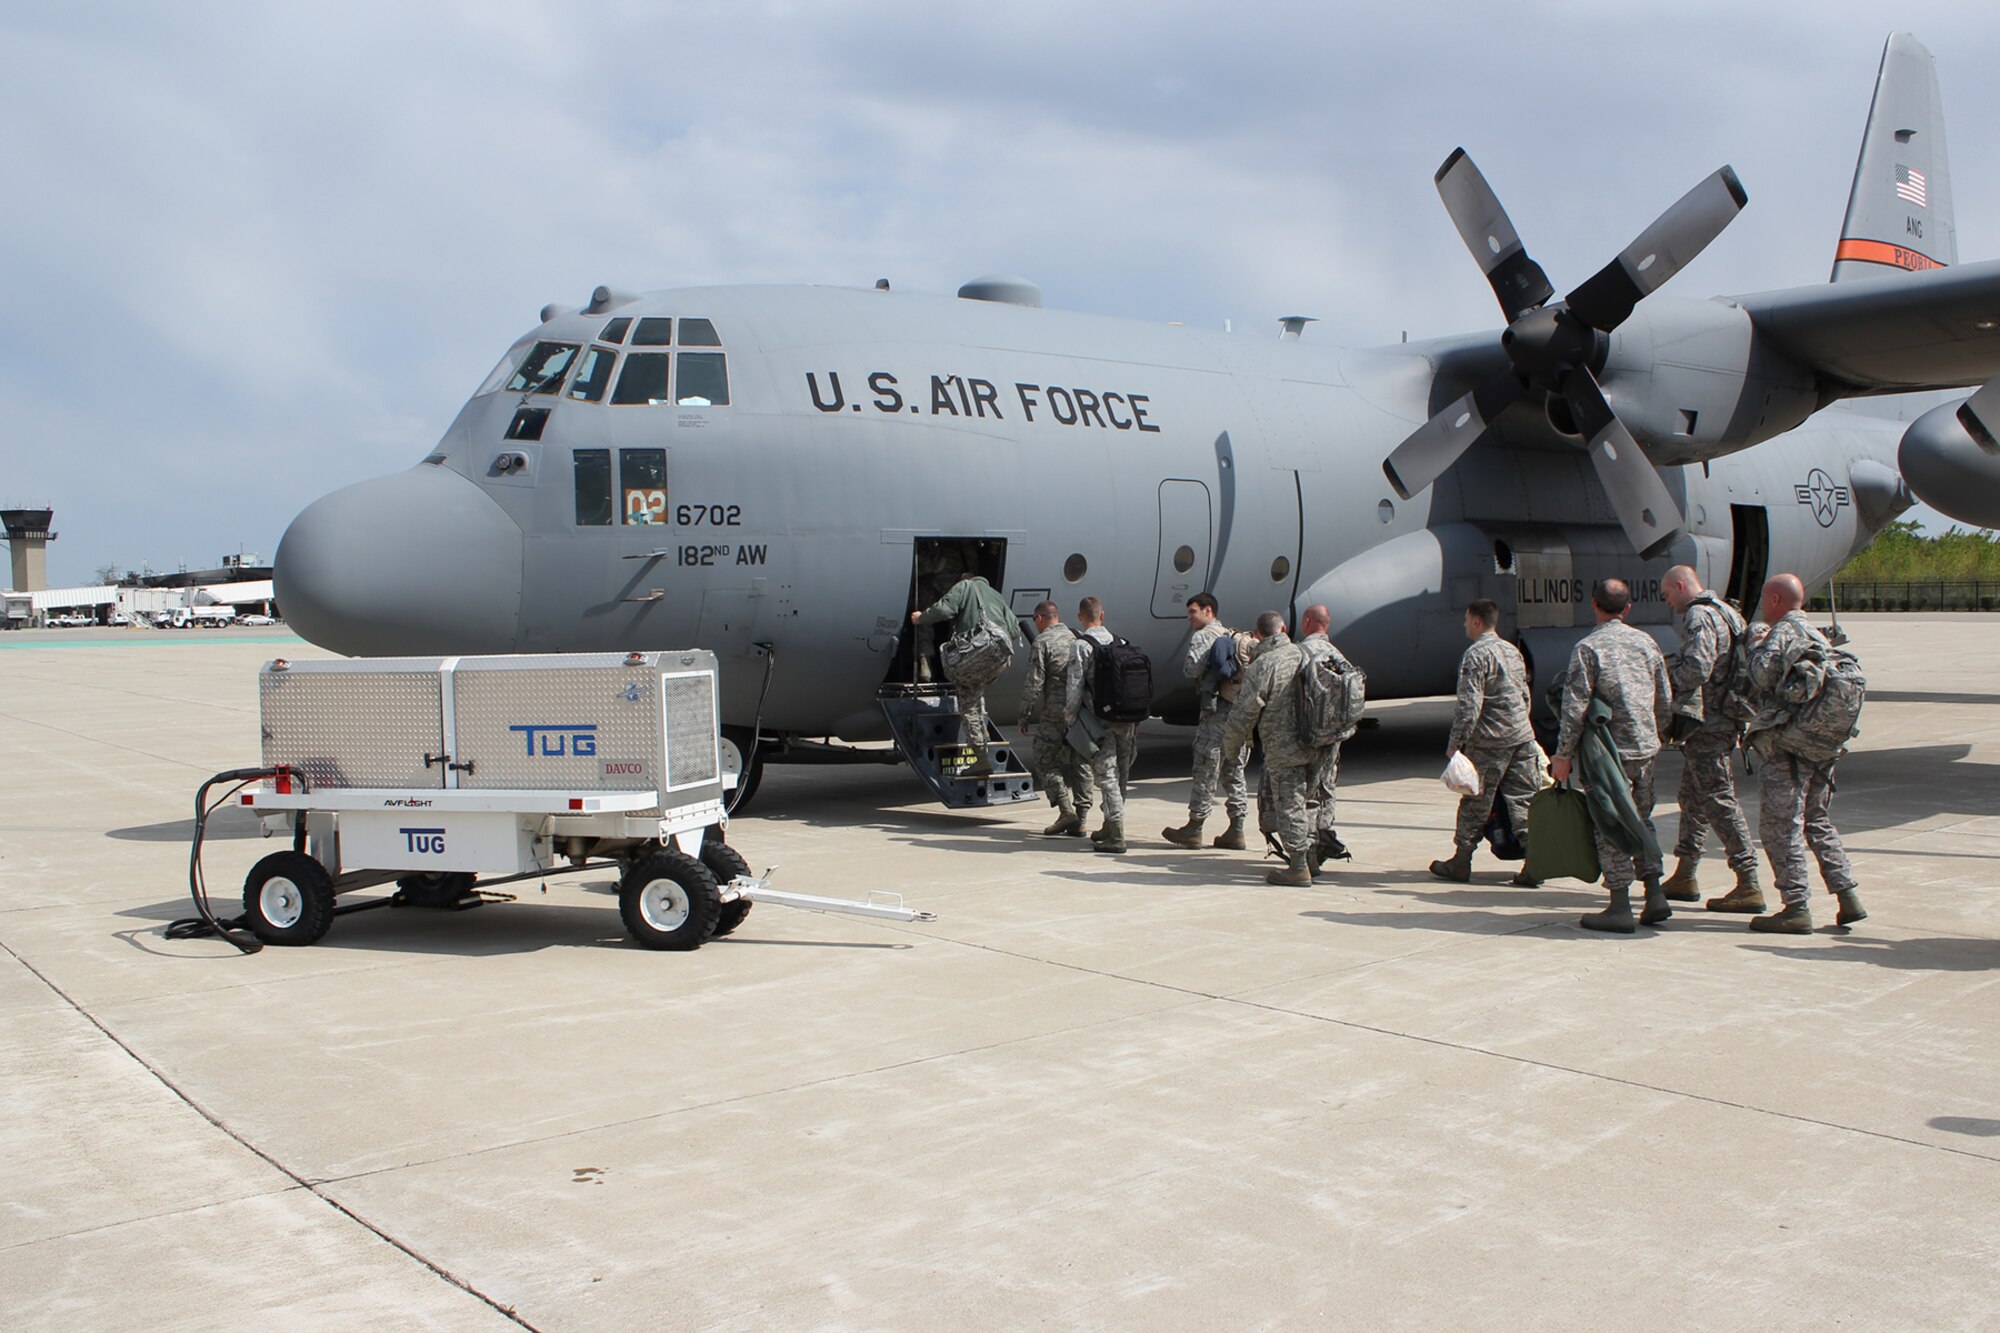 Airmen from the 127th Civil Engineer Squadron board a C-130 Hercules aircraft at Coleman A. Young Airport in Detroit, May 18, 2014. While the taxiways at Selfridge Air National Guard Base, Mich., are undergoing routine maintenance, the Michigan Air National Guard was able to utilize the nearby airport in Detroit – popularly known as City Airport --  as the 127CES Airmen were traveling to Maine for a training deployment. The availability of the Detroit airport to use as an alternate site provides significant flexibility to the Michigan Air National Guard. Other Michigan ANG aircraft have been operating from Detroit Metropolitan Airport in Romulus, Mich., during the taxiway work at Selfridge. The C-130 is operated by the 182nd Airlift Wing, Illinois National Guard. (U.S. Air National Guard photo by Technical Sgt. Rachel Barton/Released)